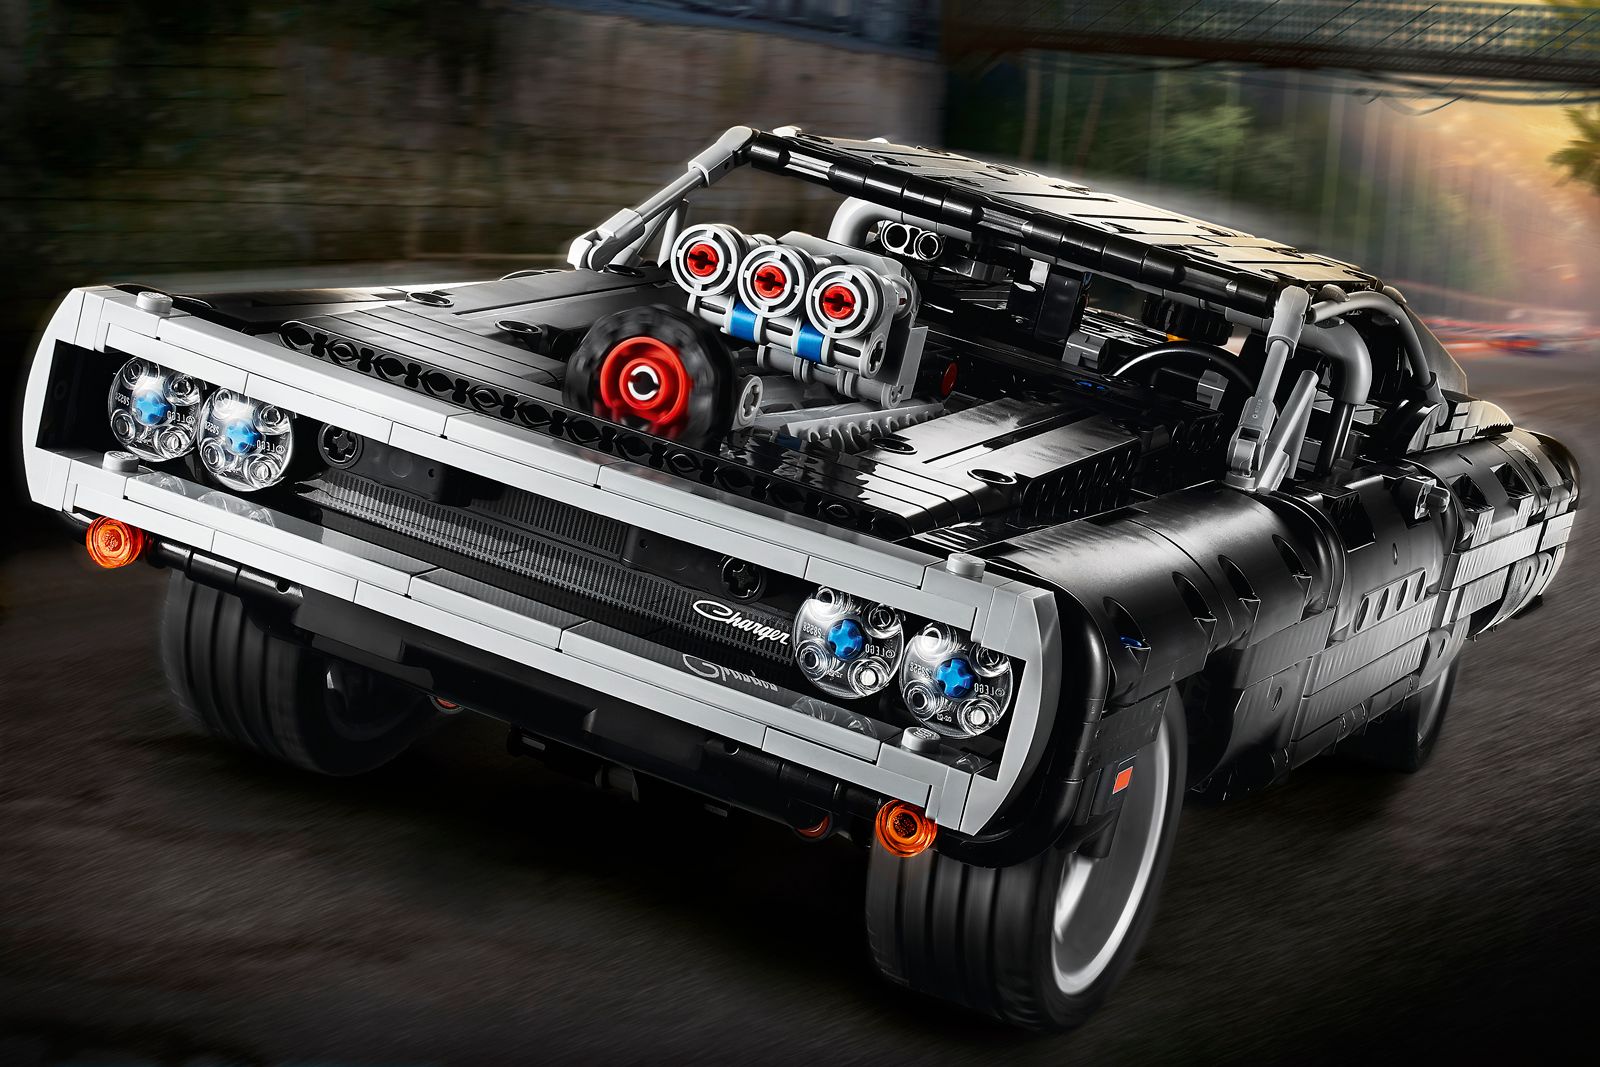 Dominic Toretto's Fast and Furious Dodge Charger has been given the Lego  Technic treatment